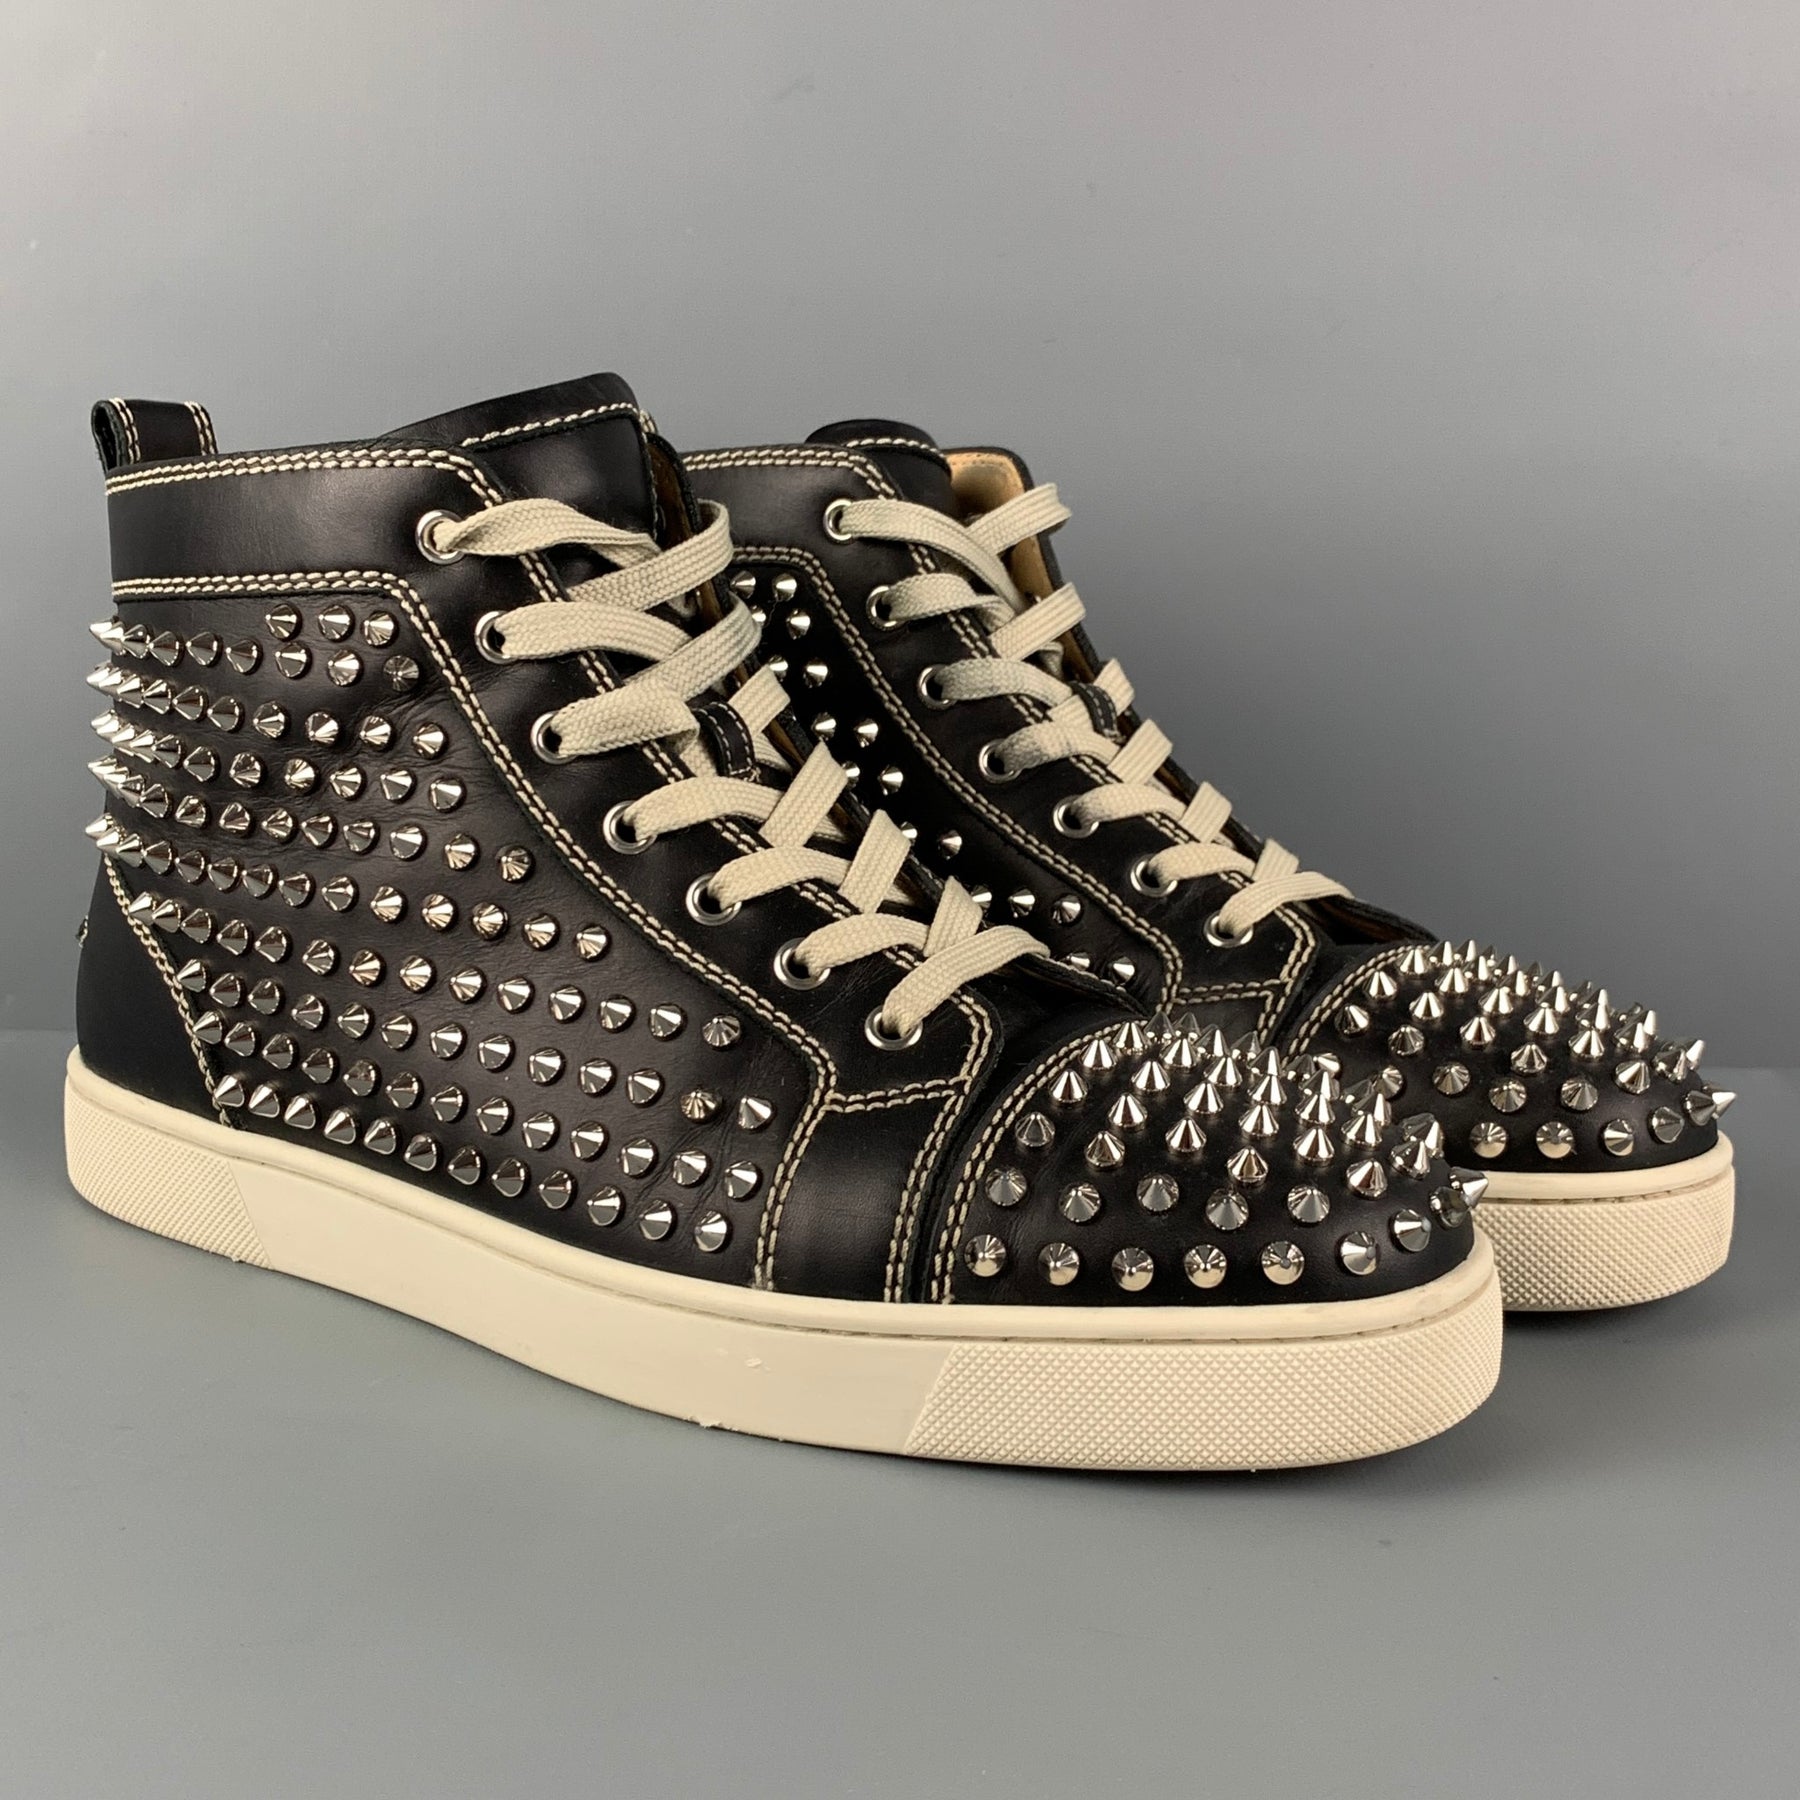 Christian Louboutin Lou Spikes High Sneakers (Trainers) White